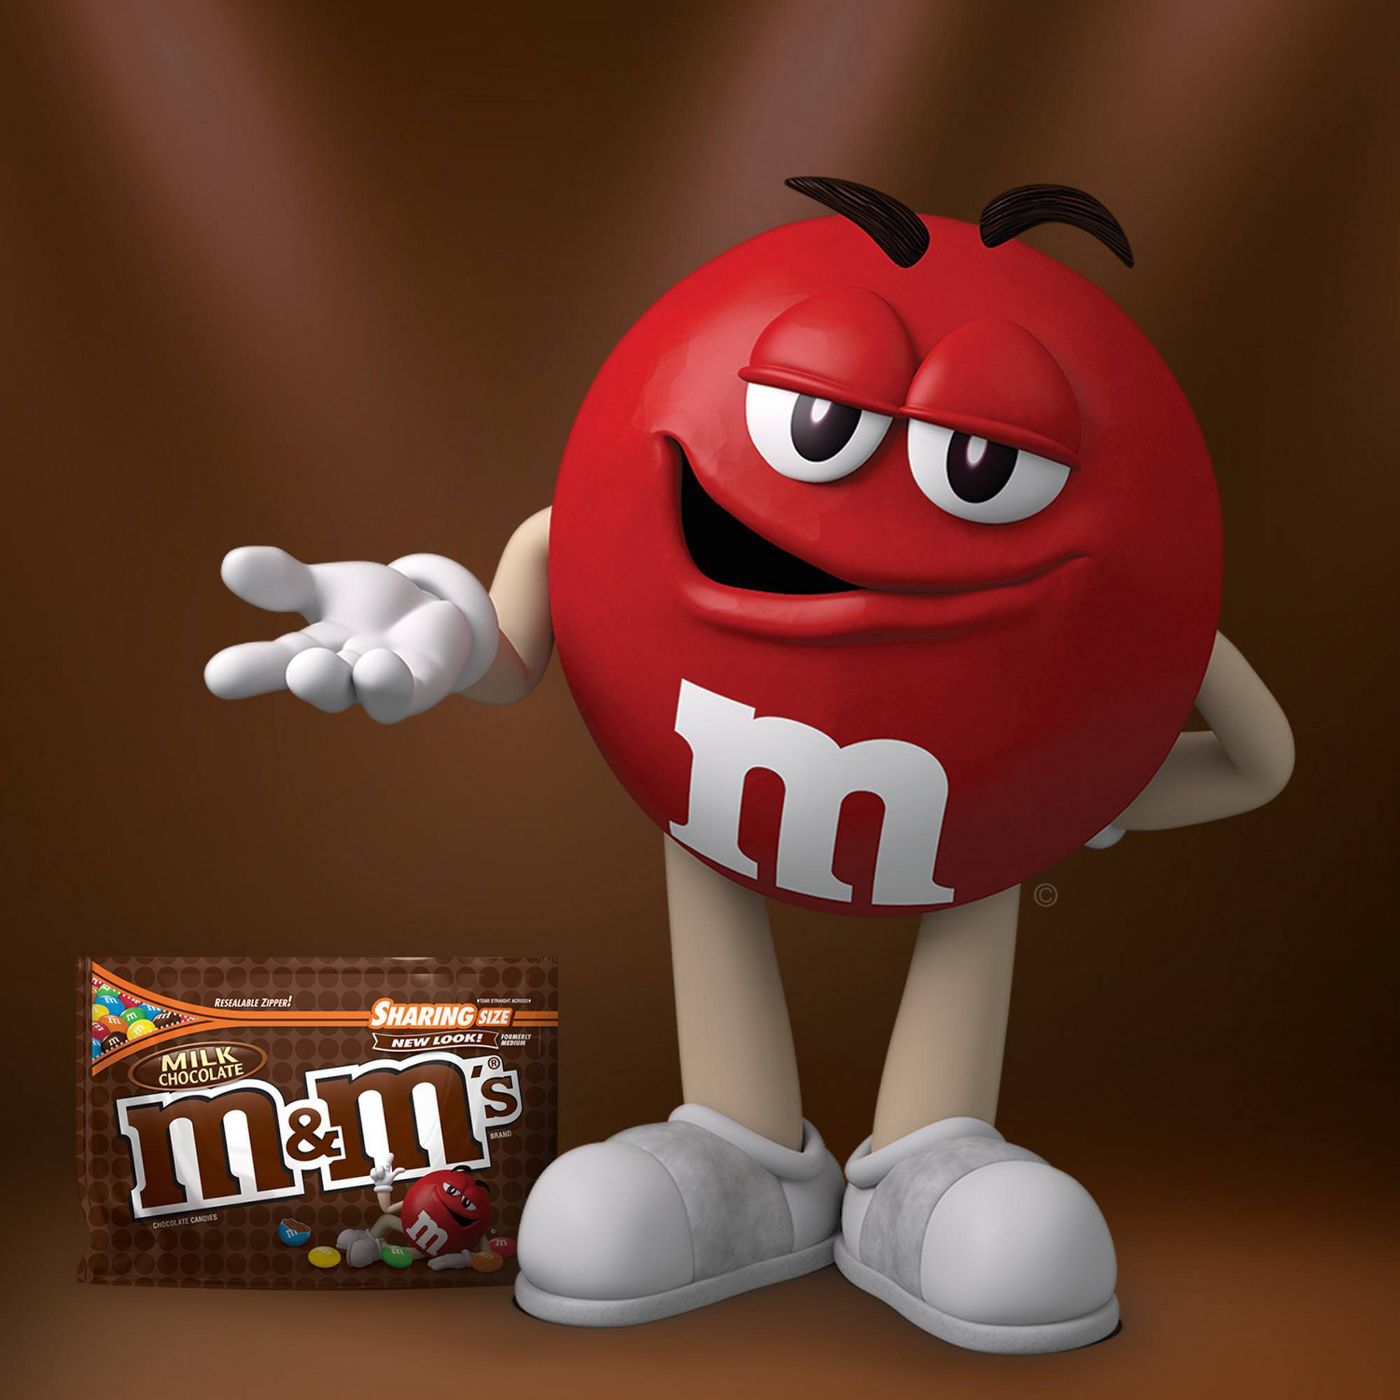 Save on M&M's Milk Chocolate Candies Red White & Blue Share Size Order  Online Delivery